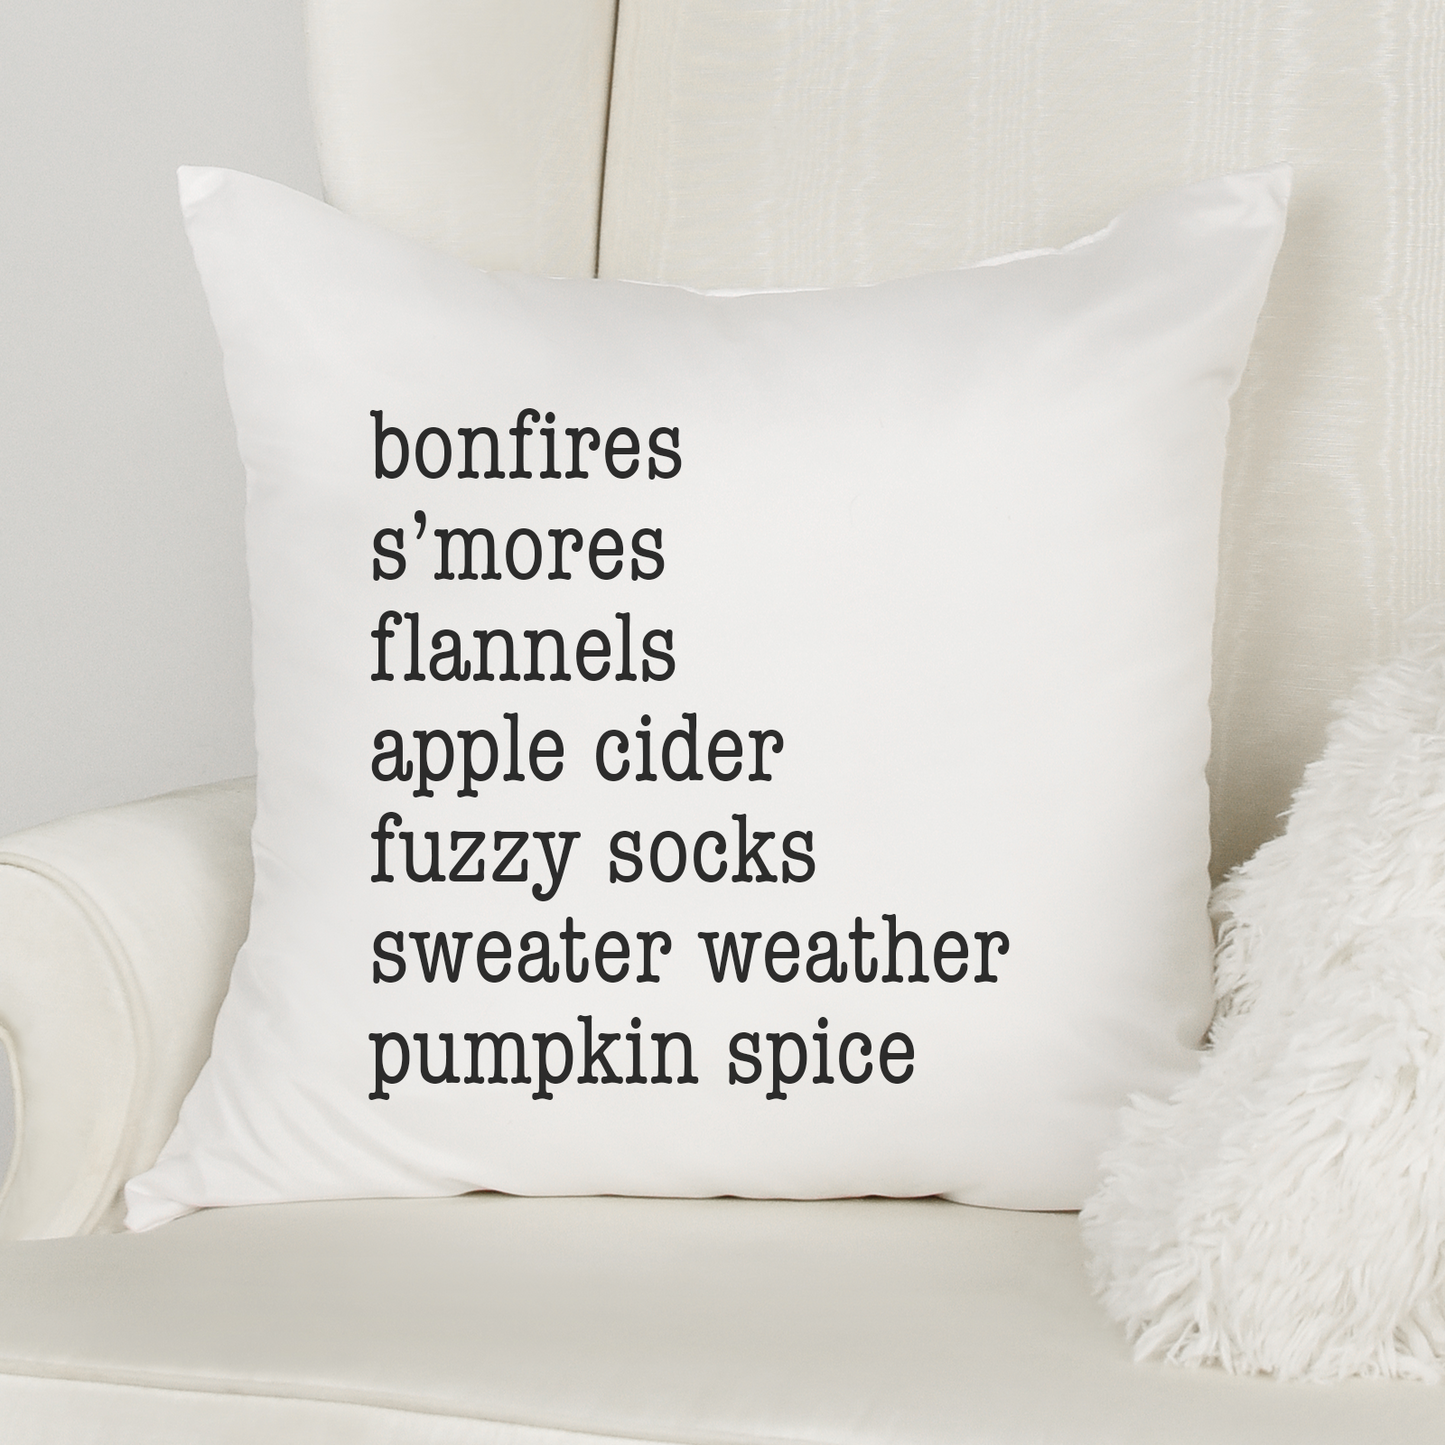 Fall Vibes Pillow